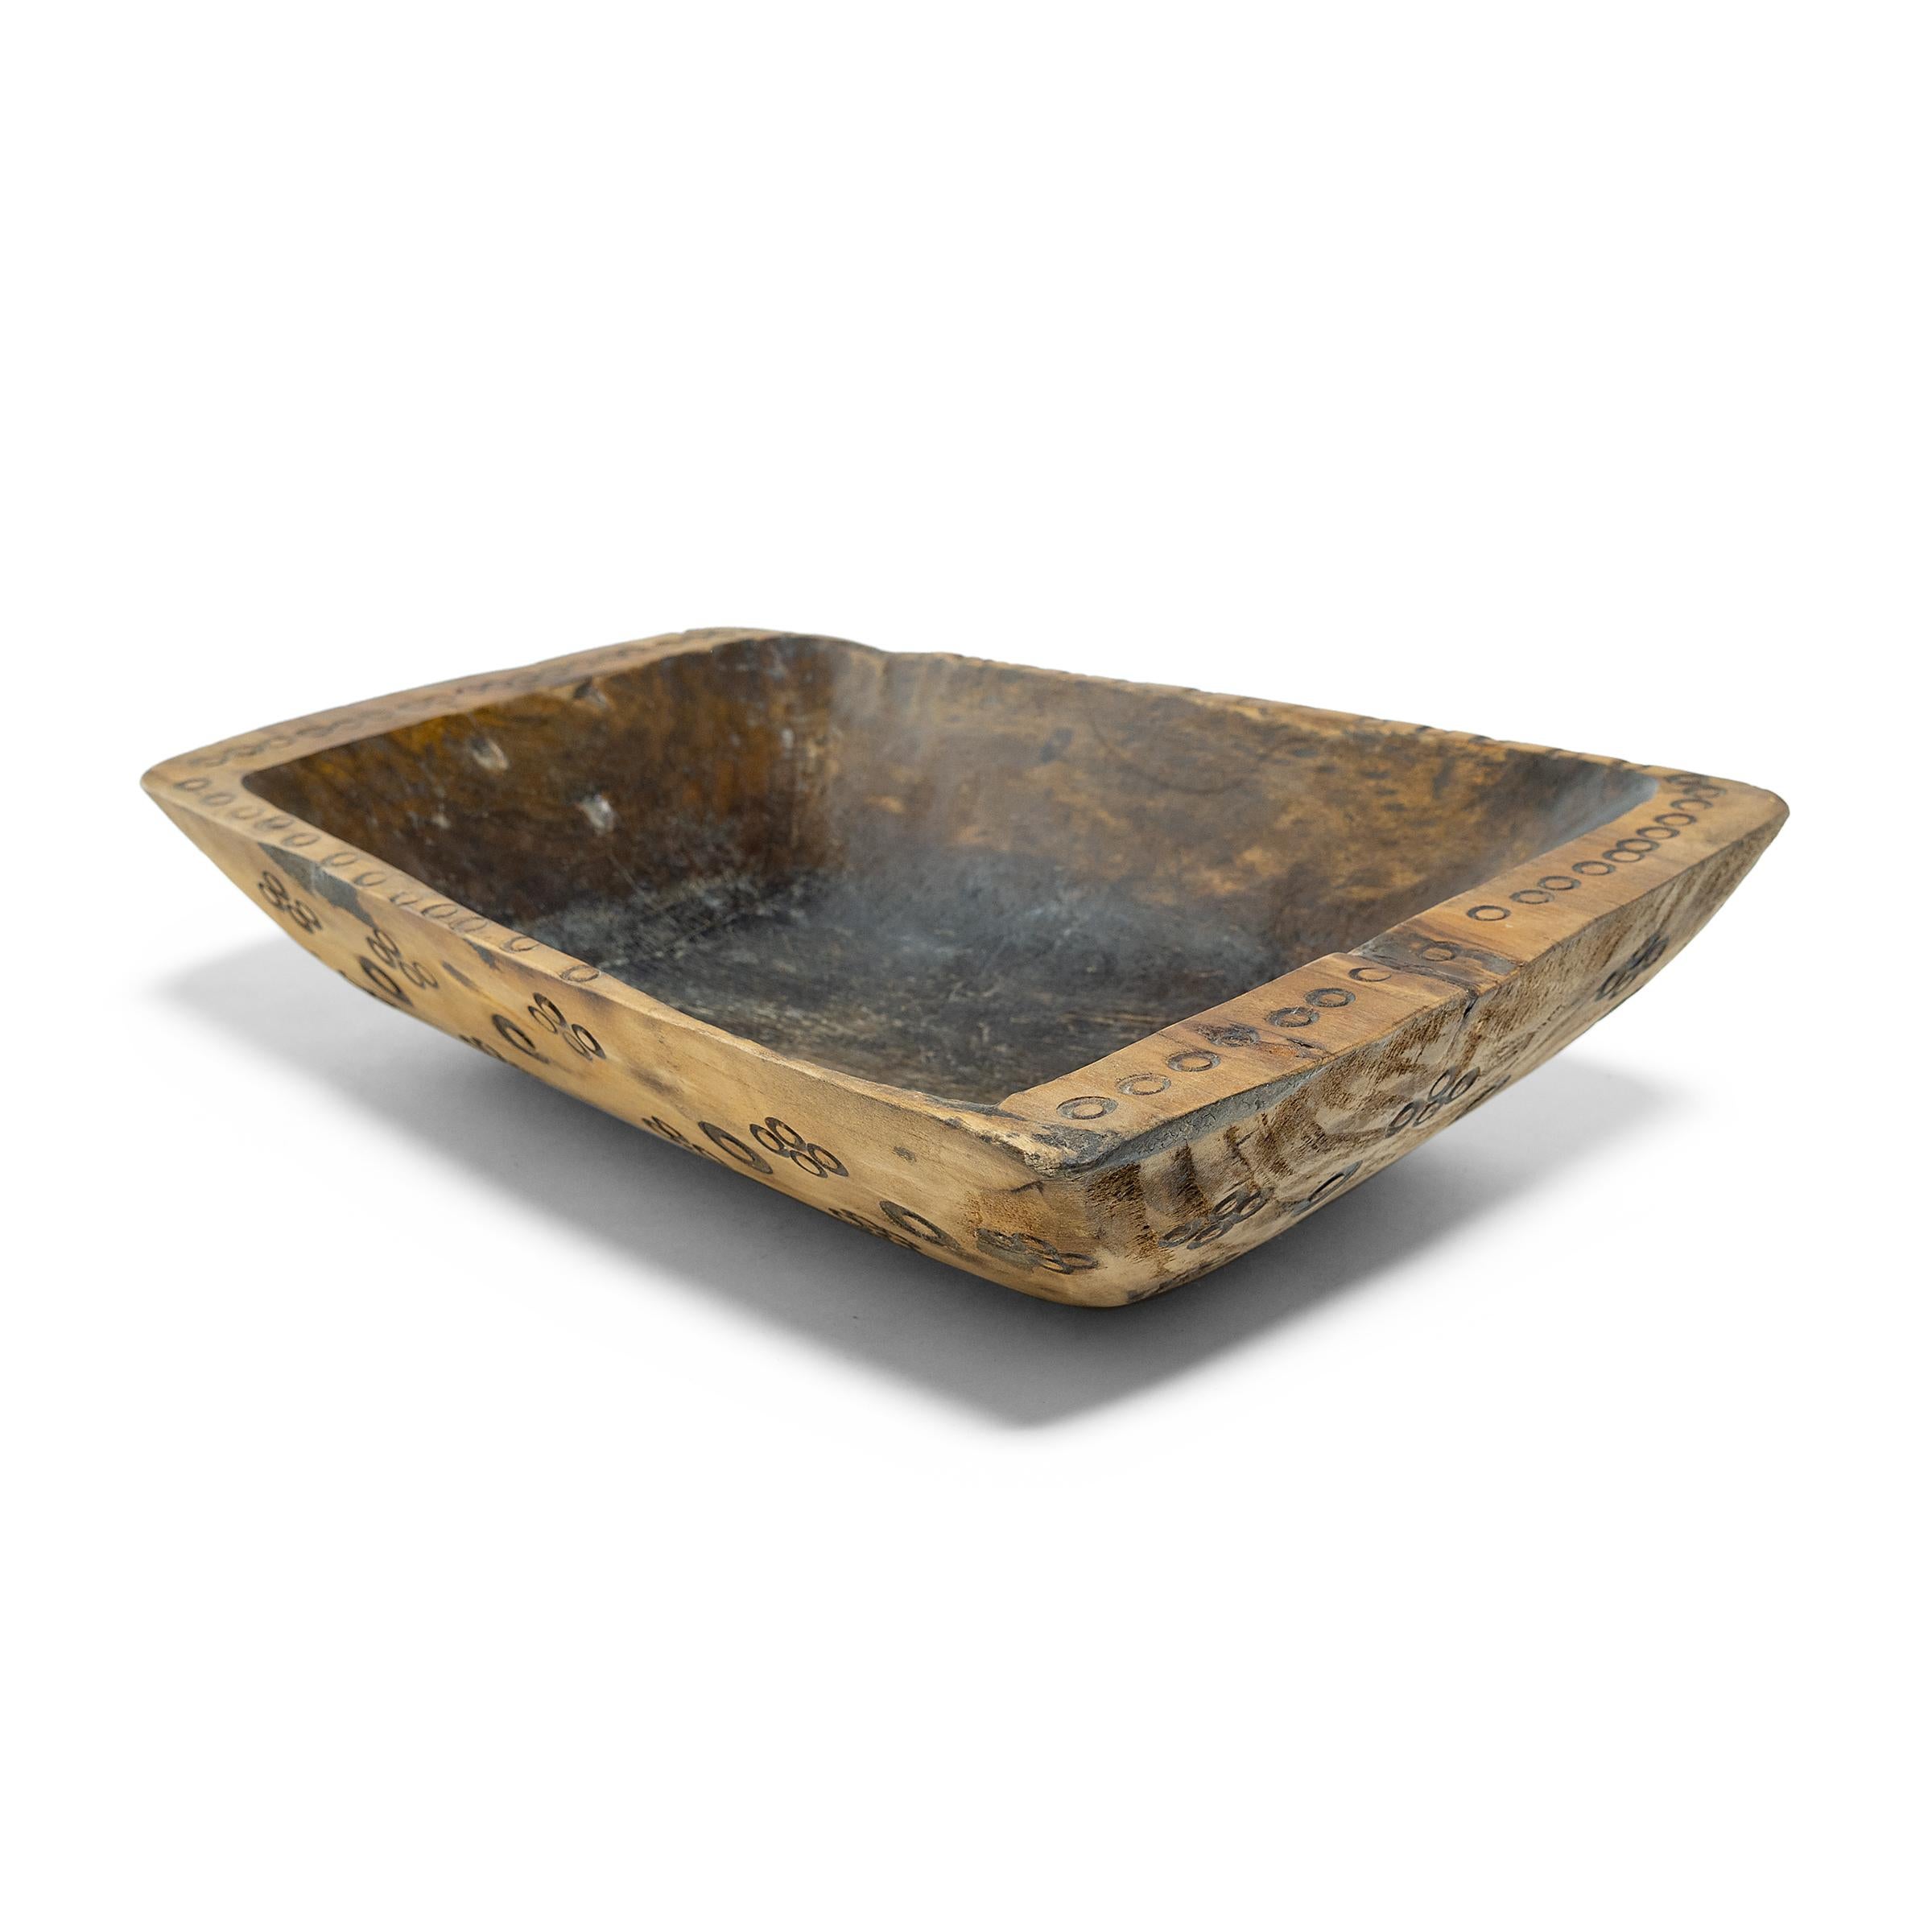 This wooden farm tray from northern China charms with its rustic finish and asymmetrical form. Hand-carved from a single block of wood, the large tray is truly one-of-a-kind, shaped to follow the natural contours of the wood. The exterior has been